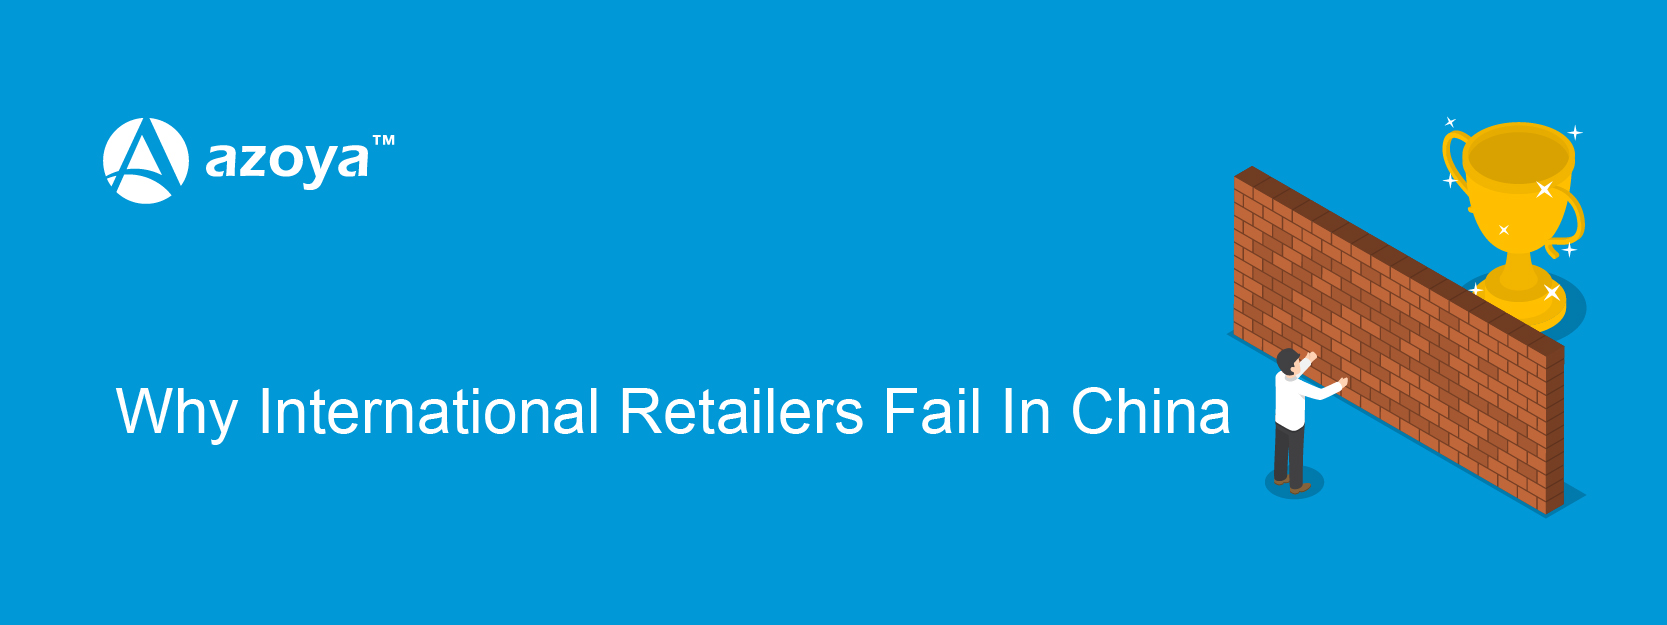 why international retailers fail in china